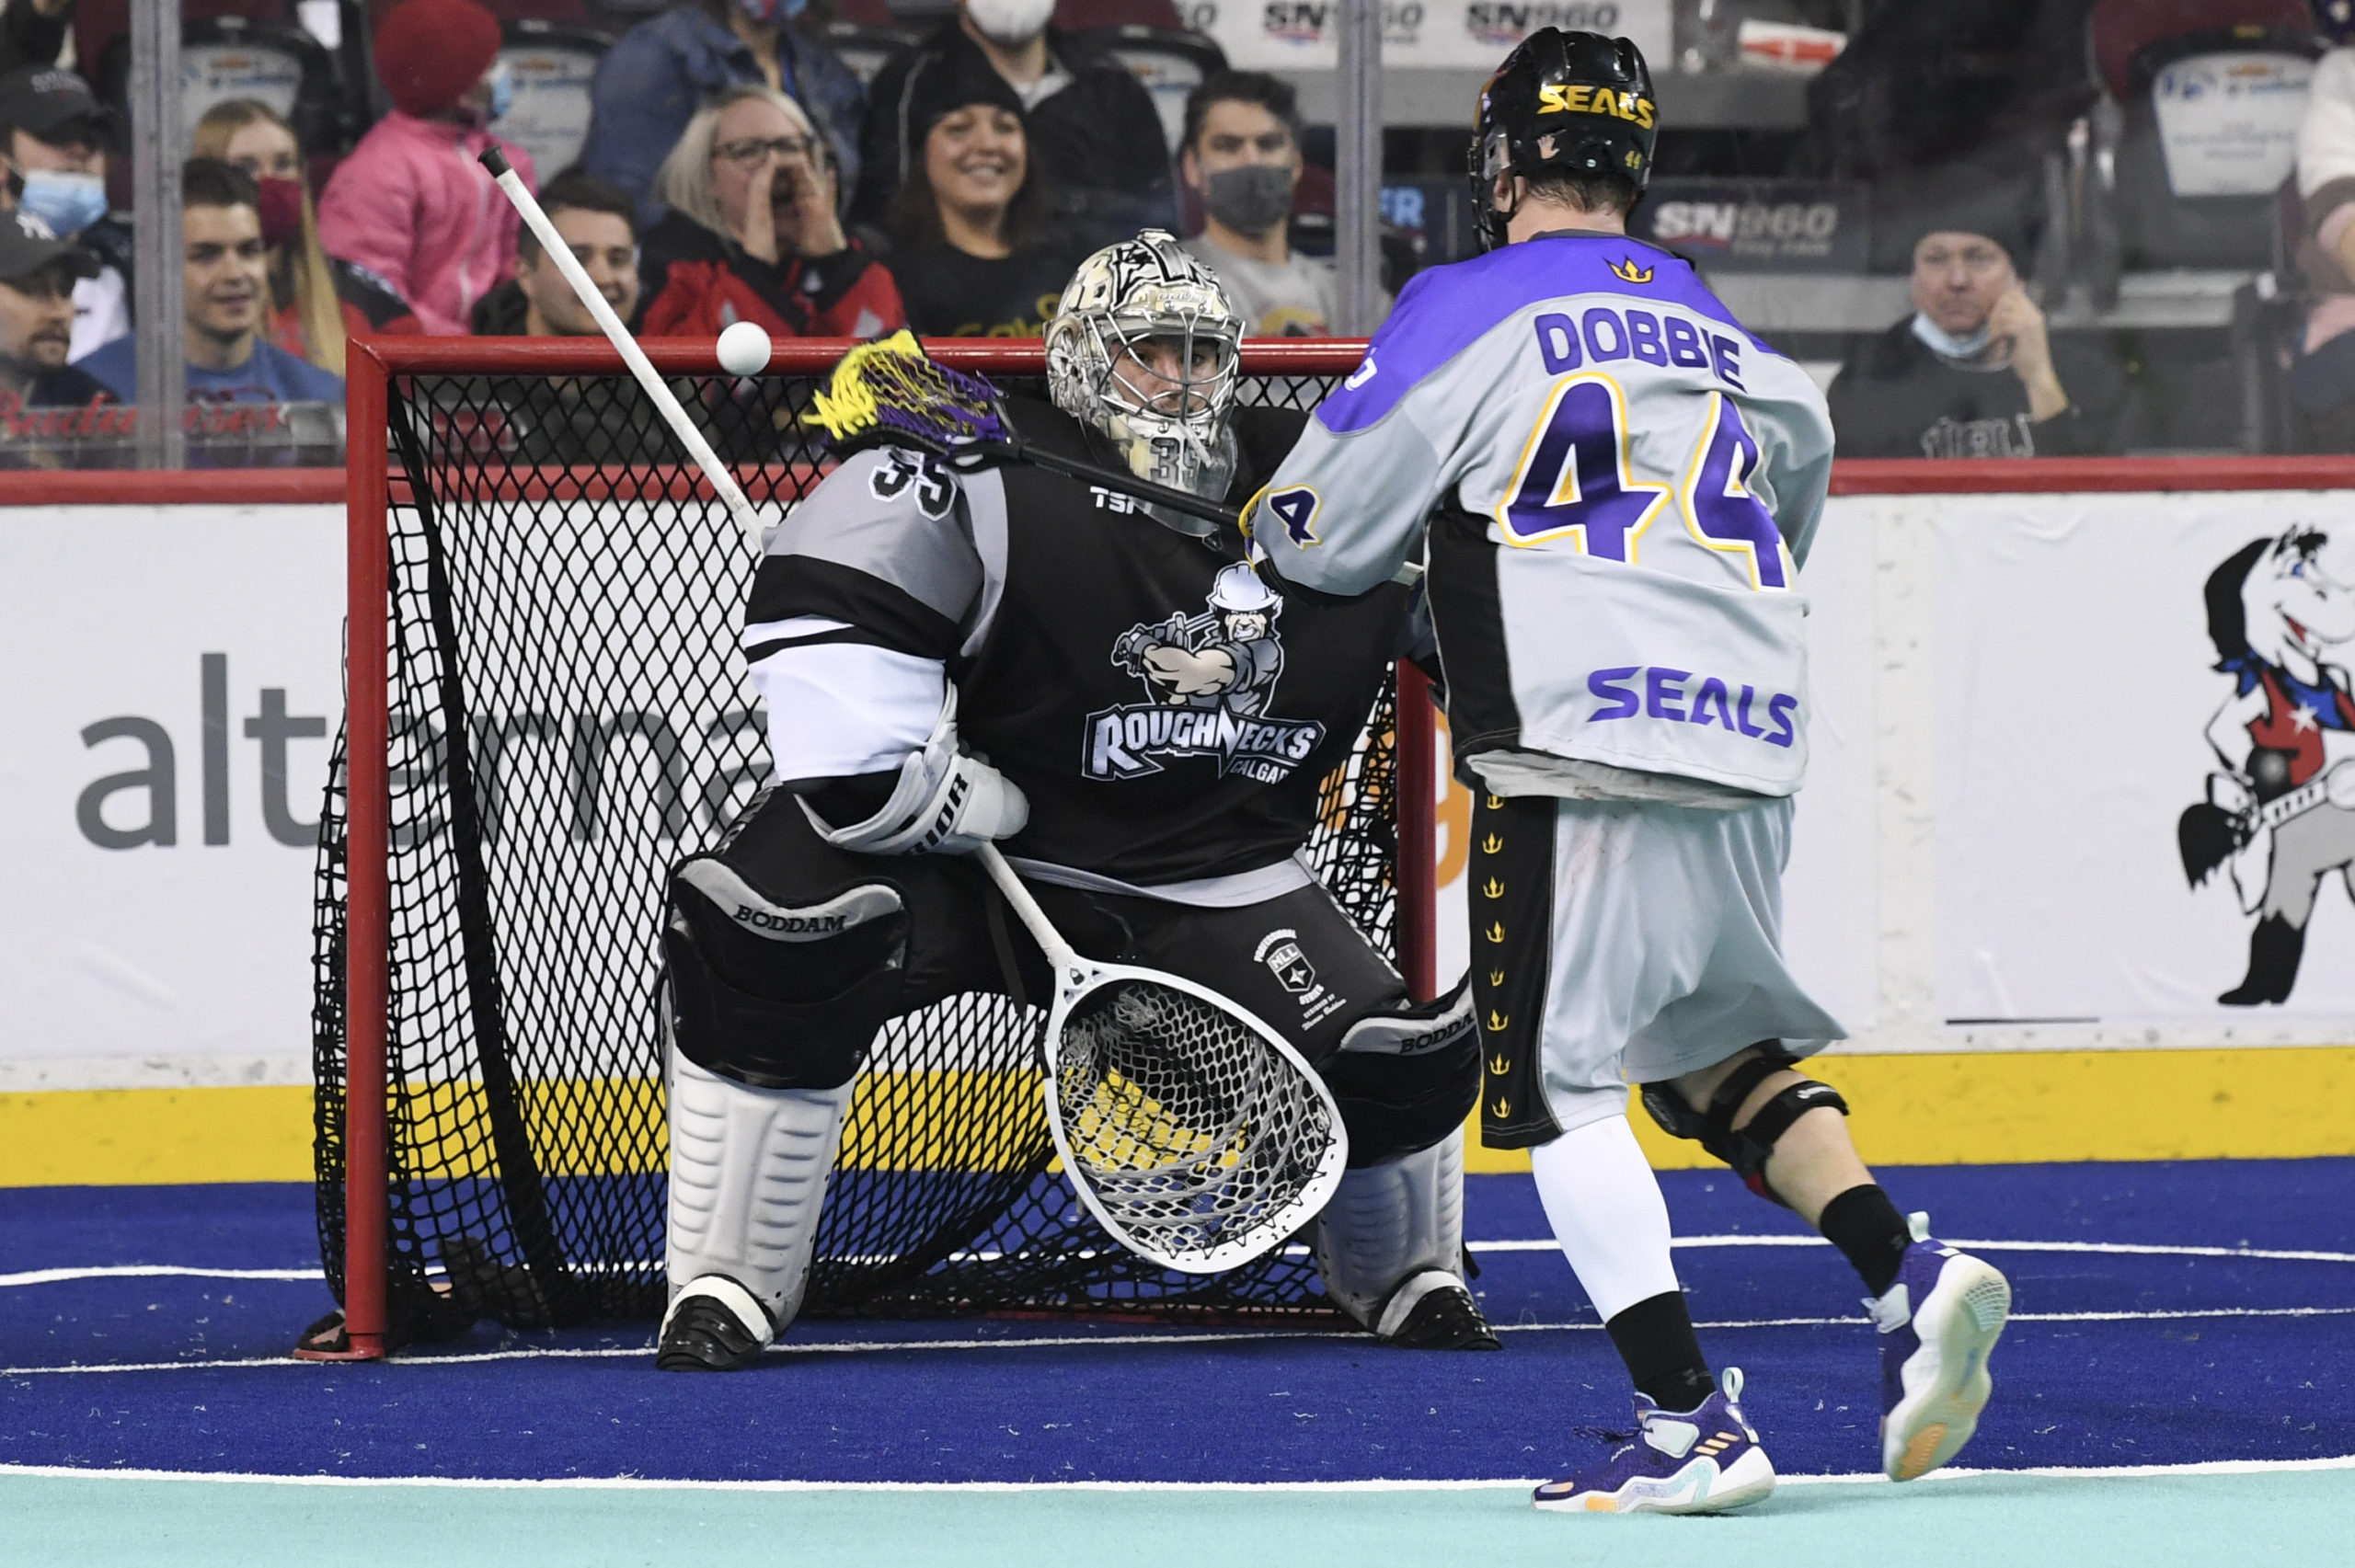 Shorthanded Calgary Roughnecks lose to Seals but earn NLL playoff spot